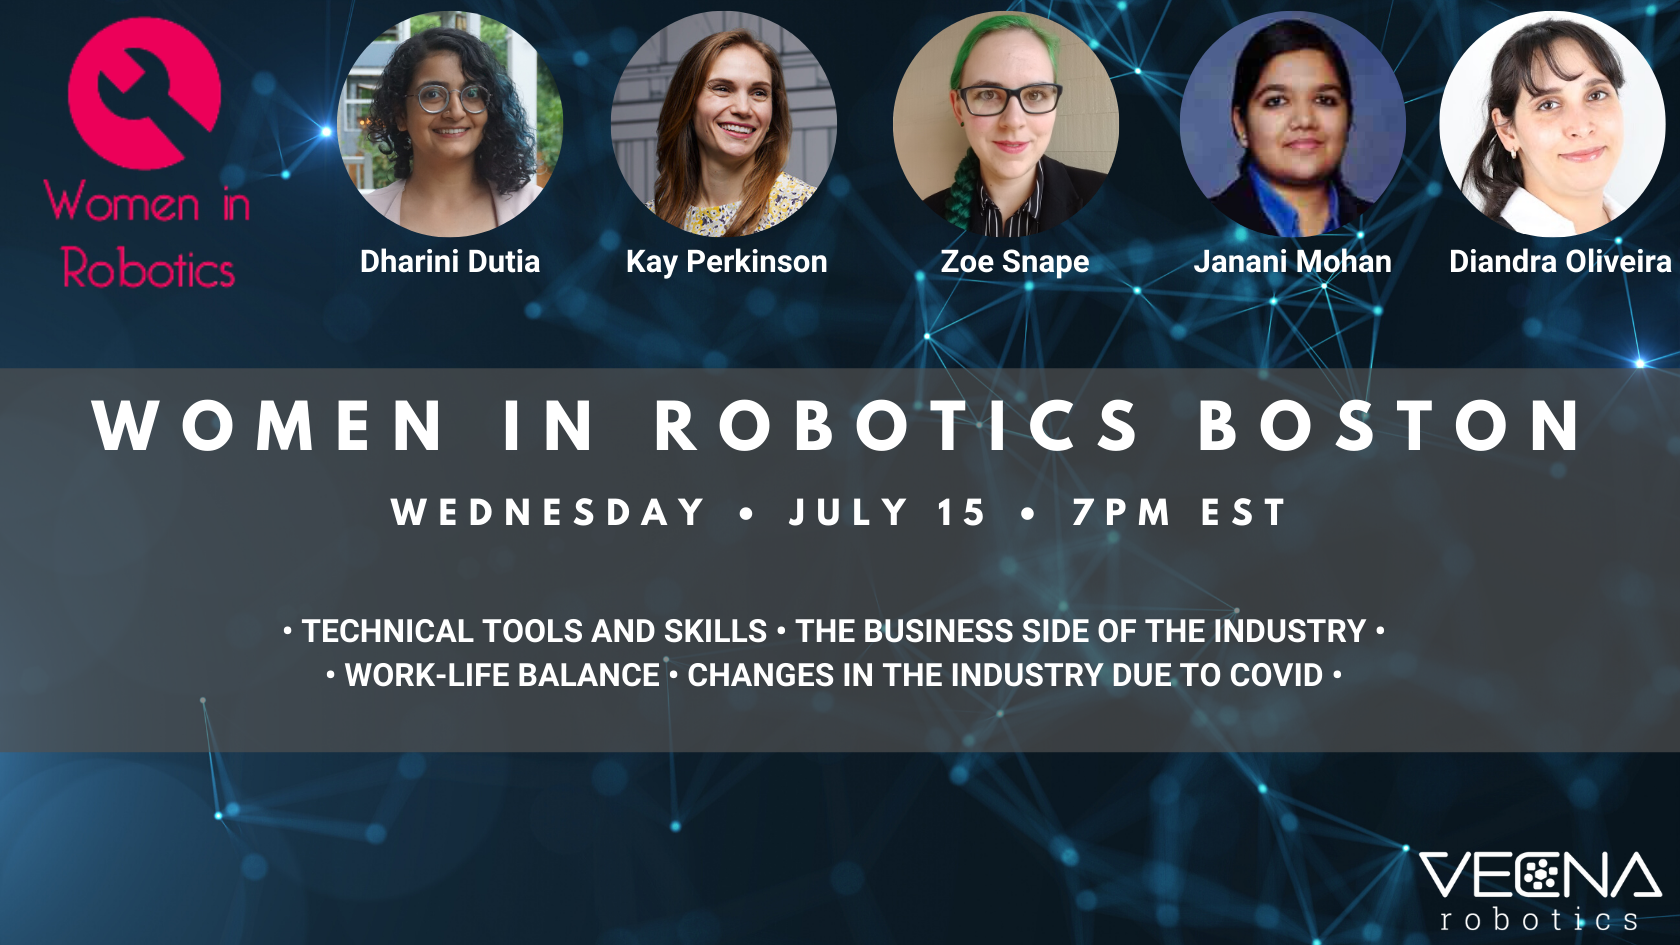 A Coffee Chat with Women in Robotics